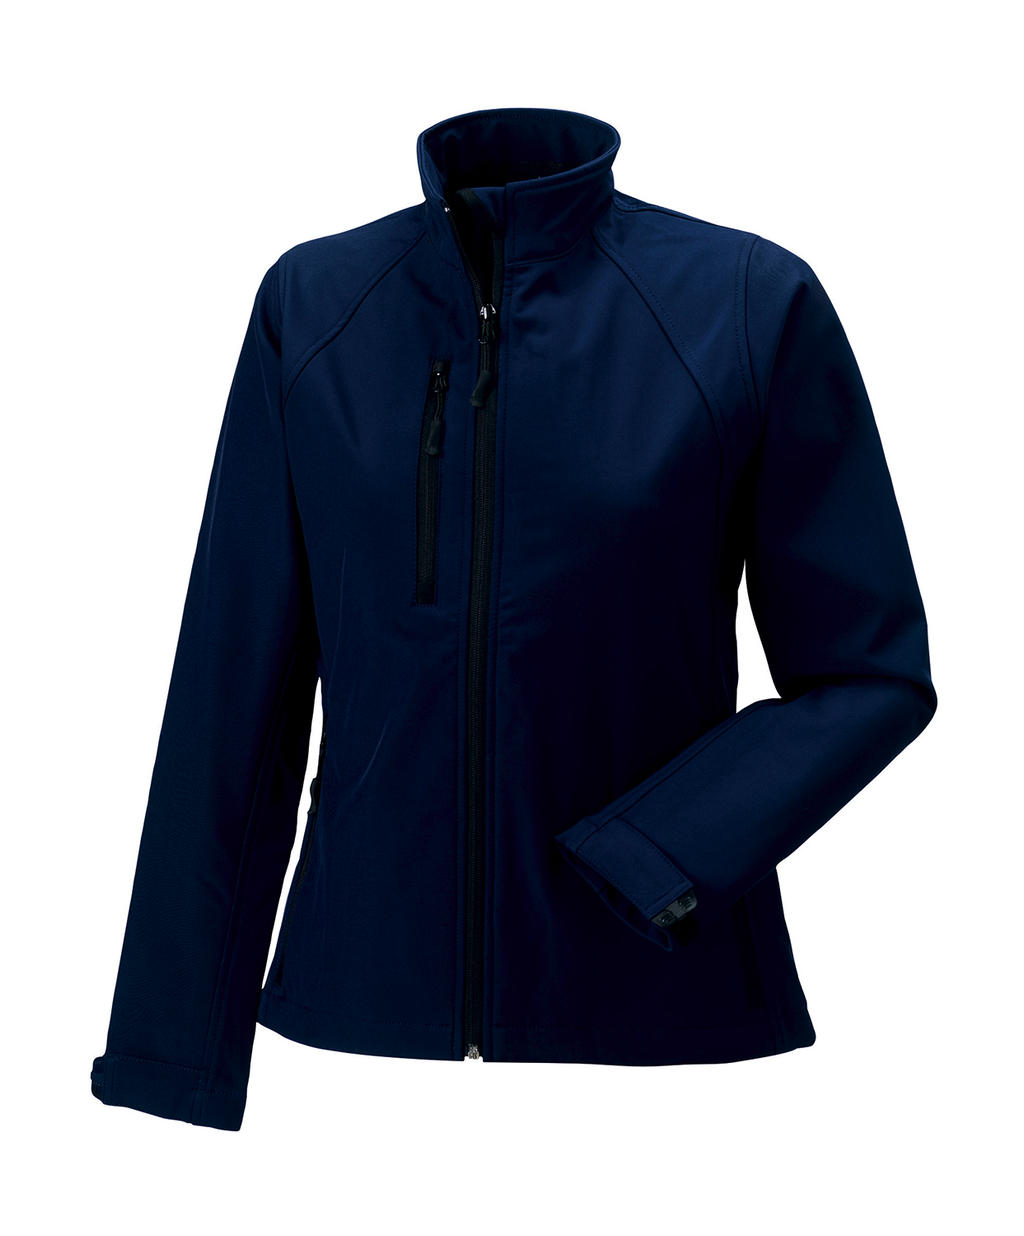  Ladies Softshell Jacket  in Farbe French Navy